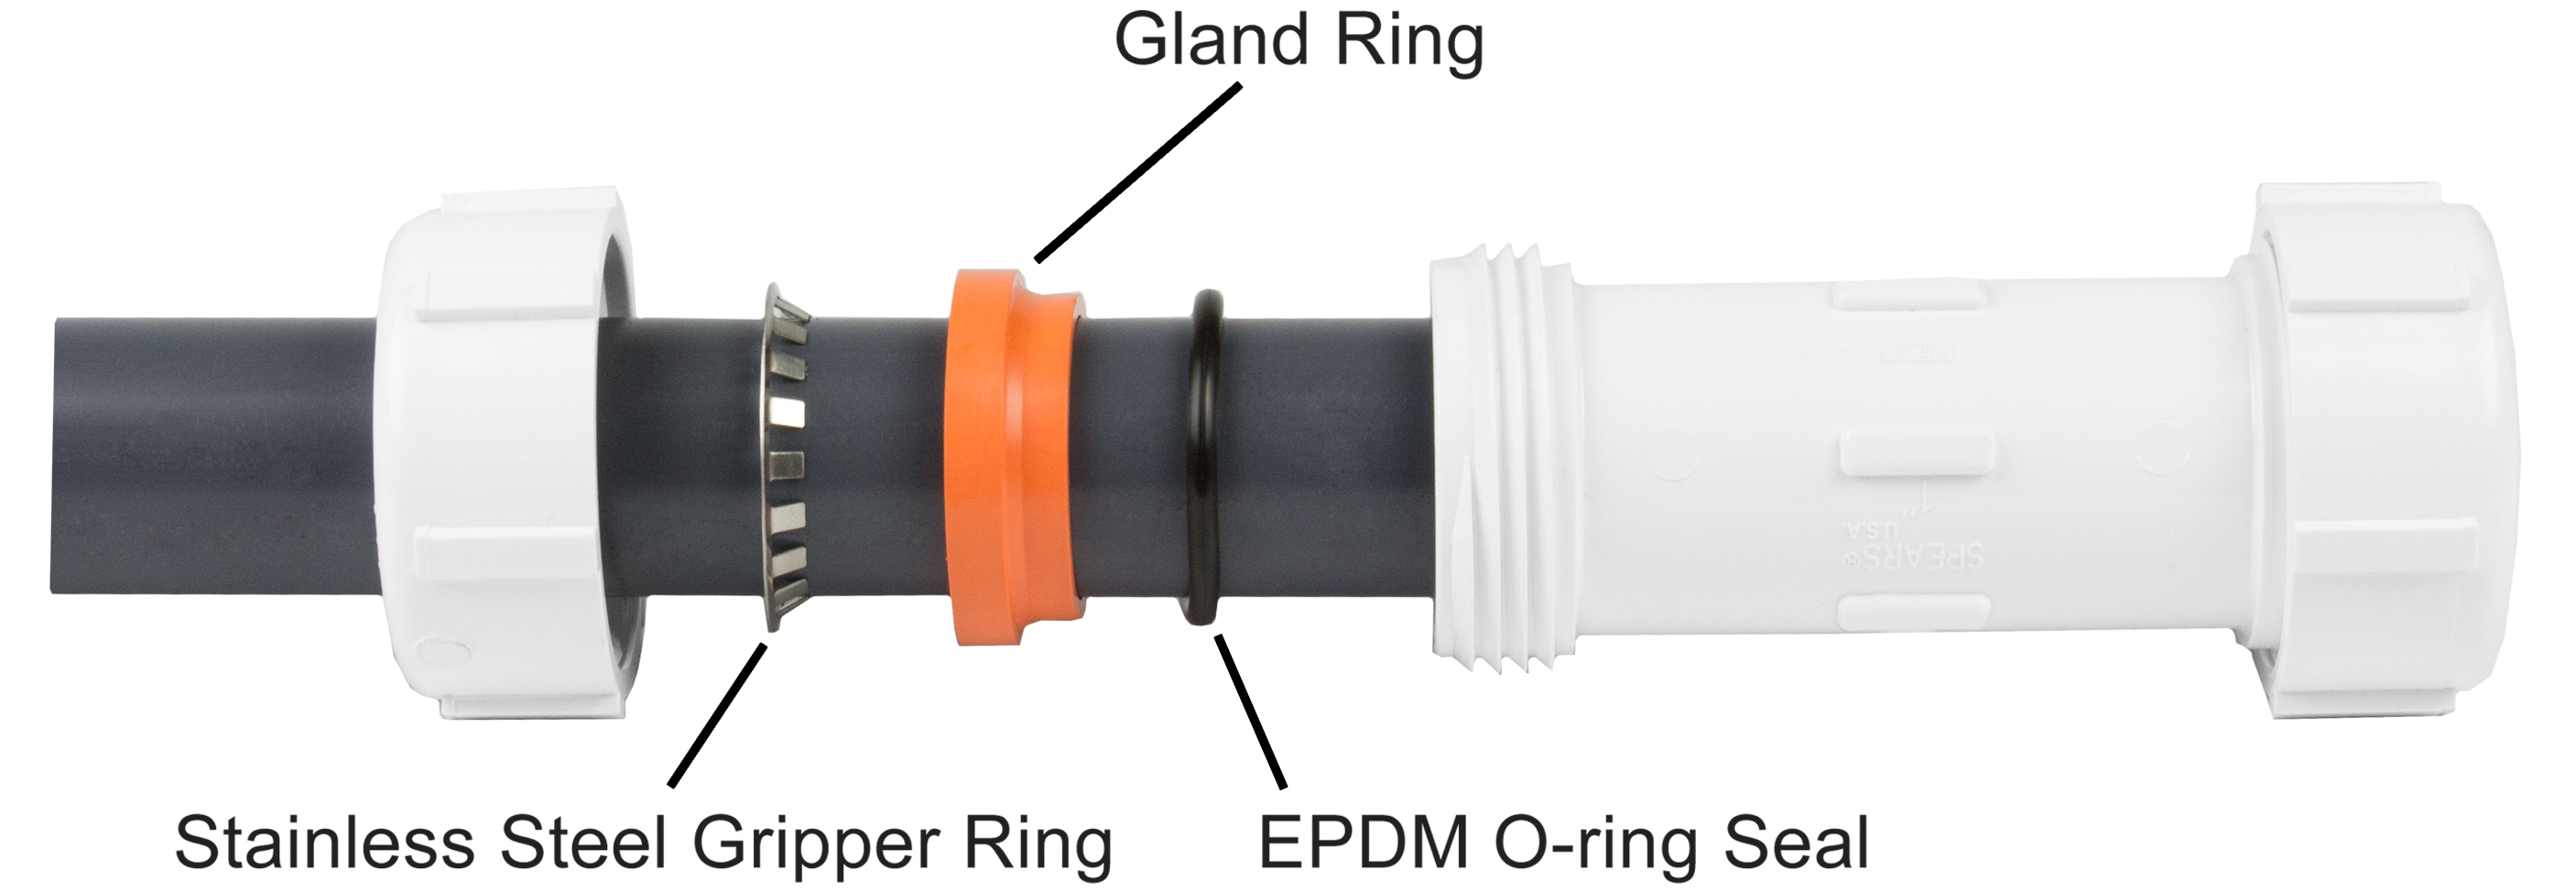 Spears S119 Series PVC Pipe Fitting White Repair Coupling with EPDM O-ring 6 Socket 